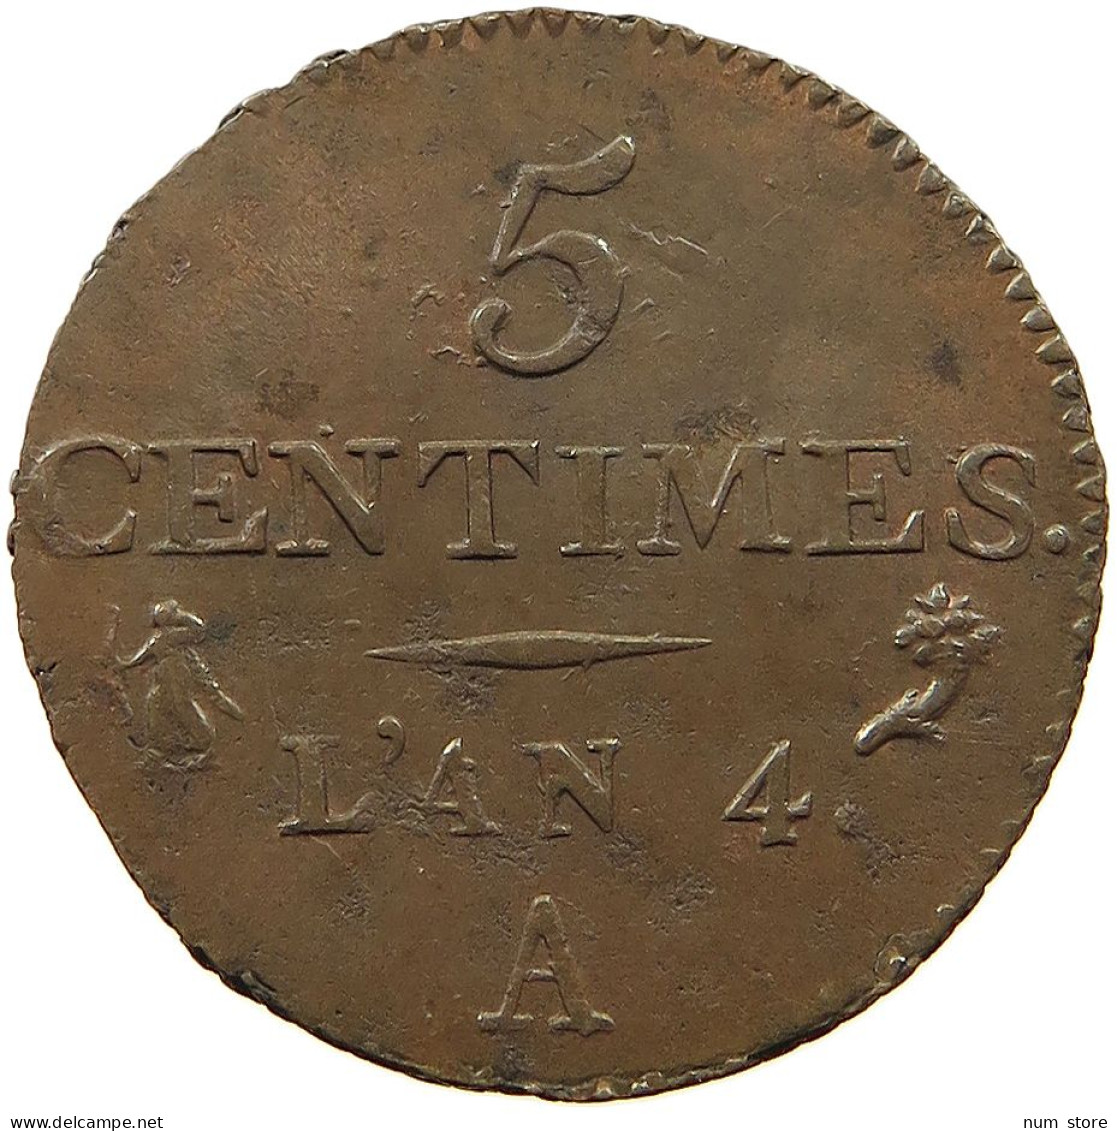 FRANCE 5 CENTIMES L'AN 4 A 5 CENTIMES 4 A HEAD SILHOUETTE ON REVERS MINTING ERROR #t058 0101 - 5 Centimes